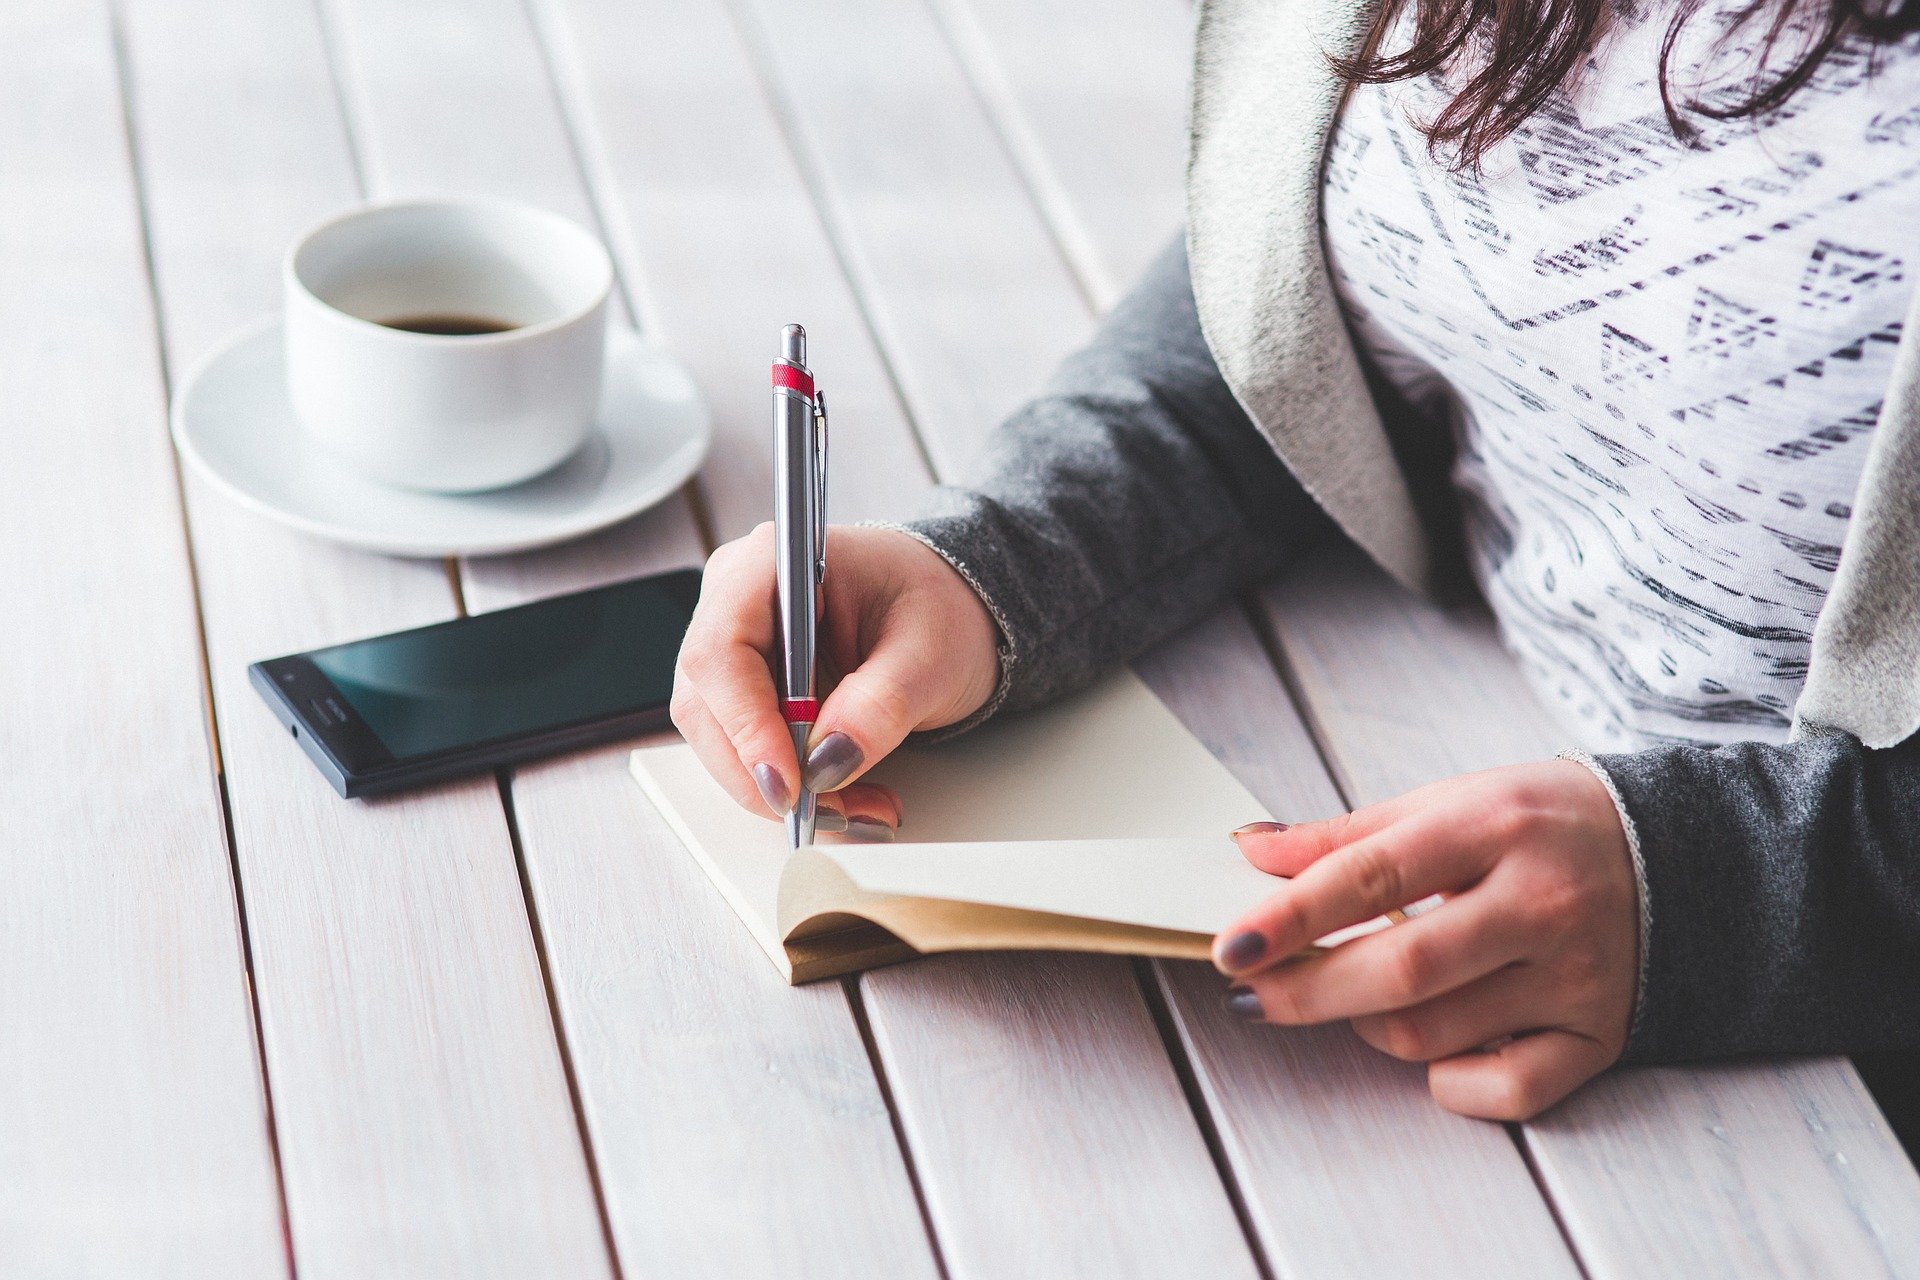 Woman writing notes in notebook. Coffee cup and mobile phone sit on white table.